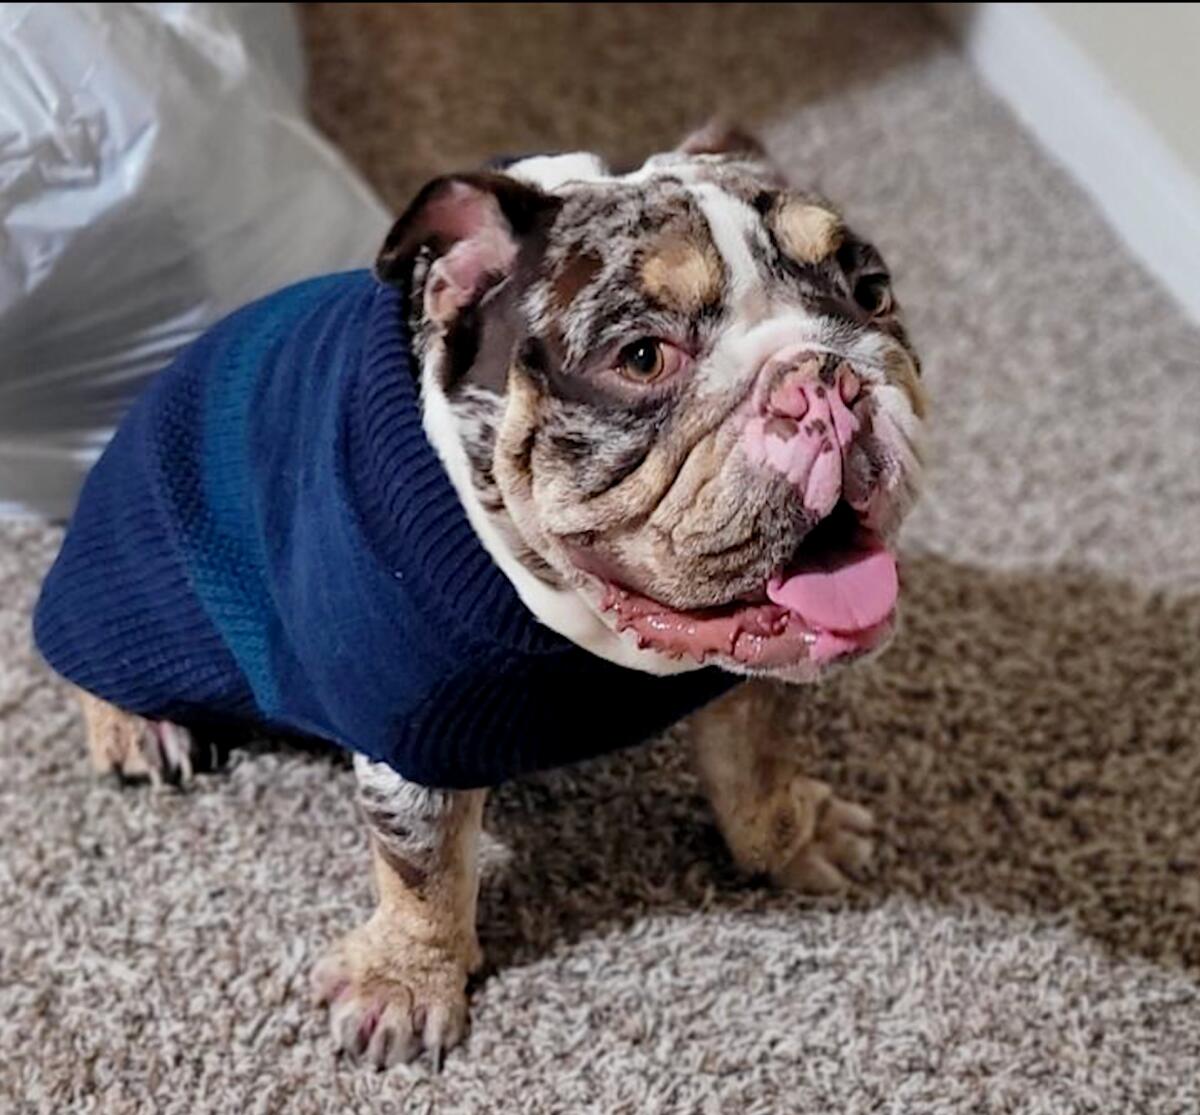 A tricolor English bulldog wearing a blue sweater